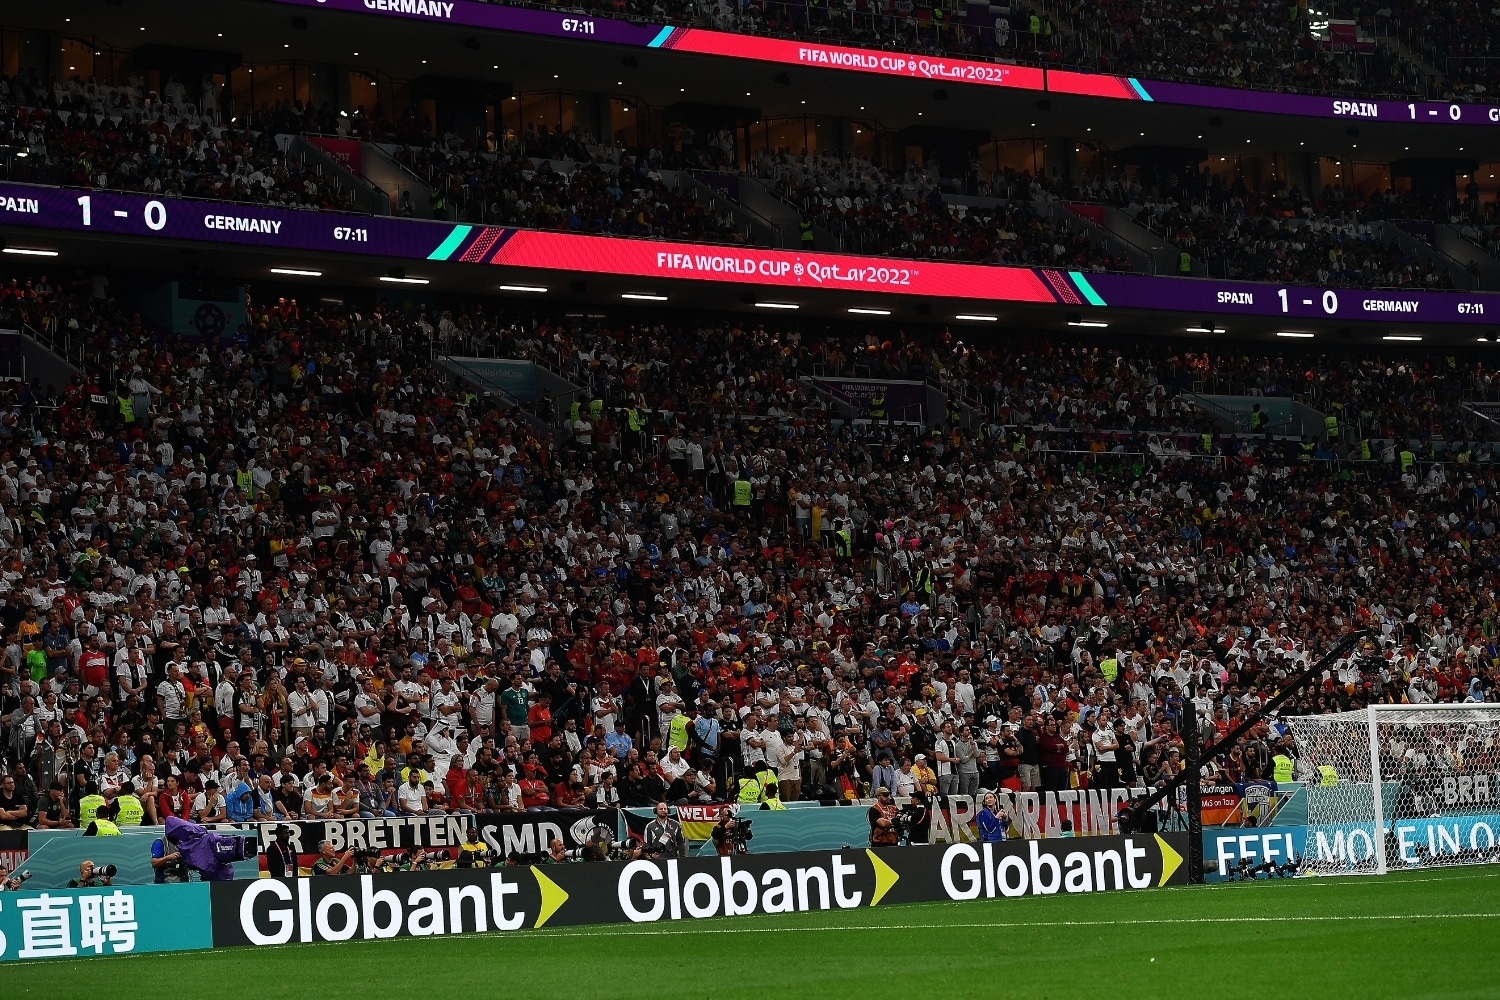 Globant advertisement on the sidelines of a World Cup match